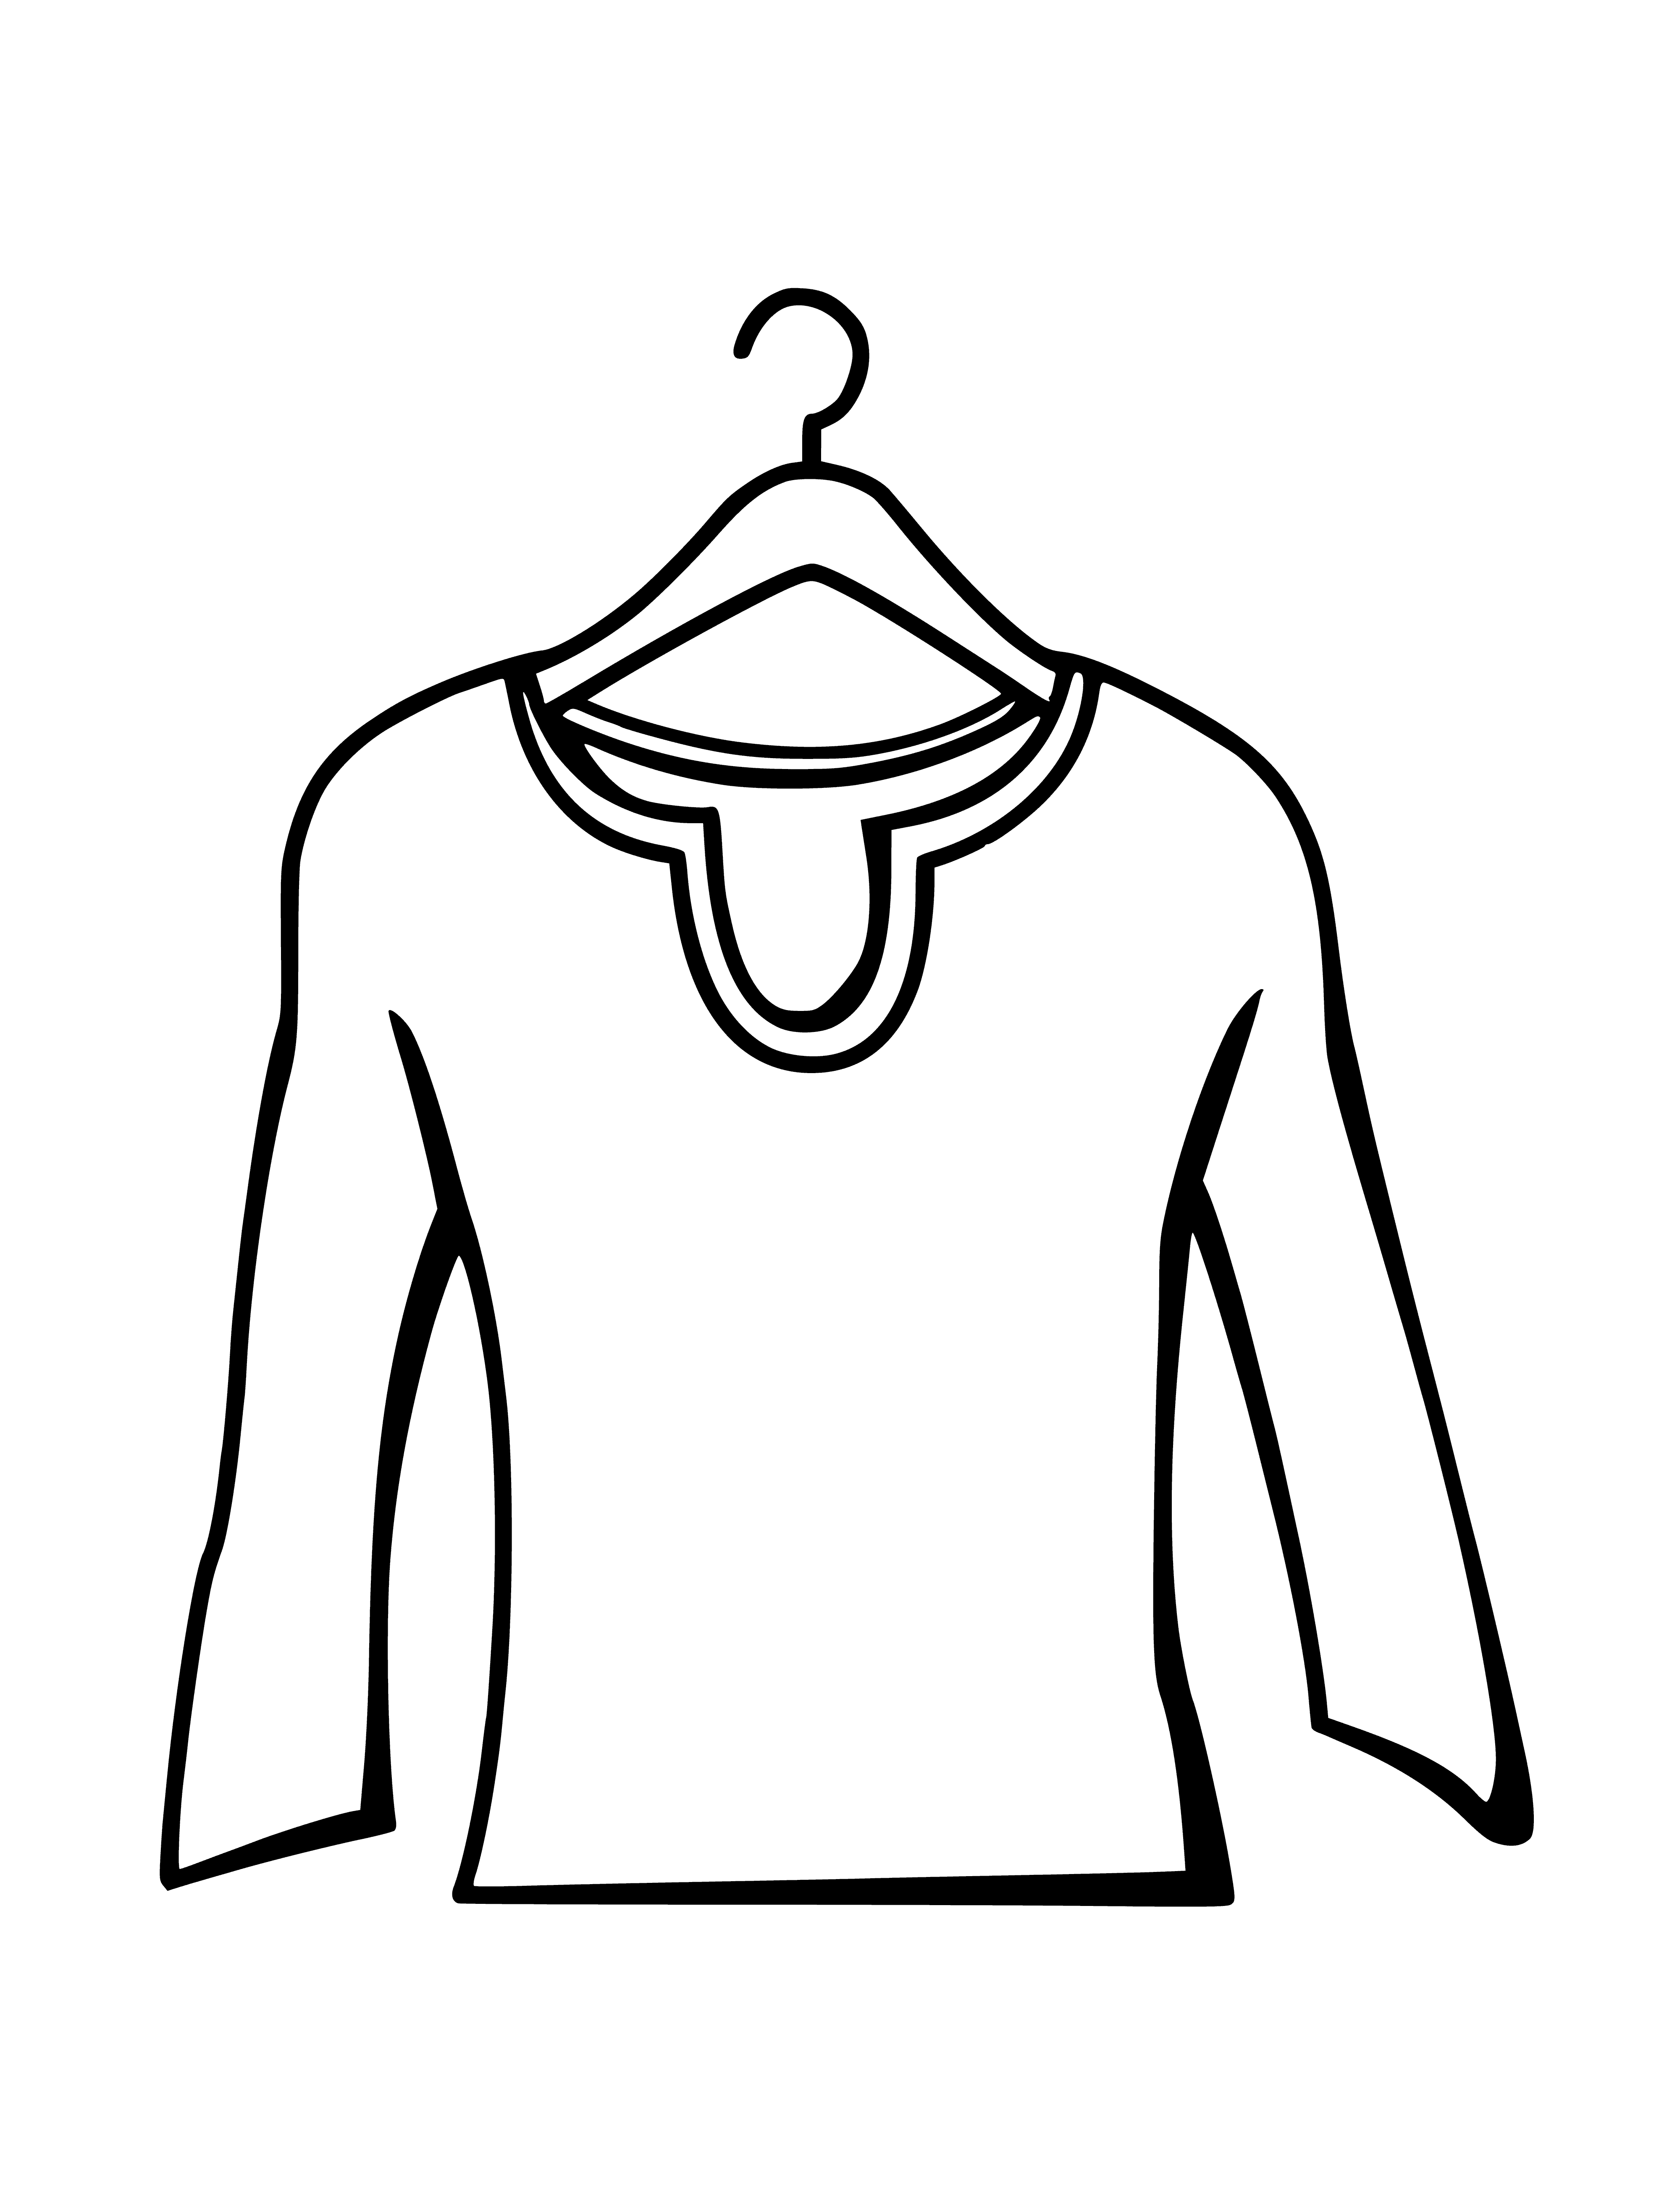 coloring page: A breezy blouse featuring white and blue stripes, long sleeves, and buttons down the front.